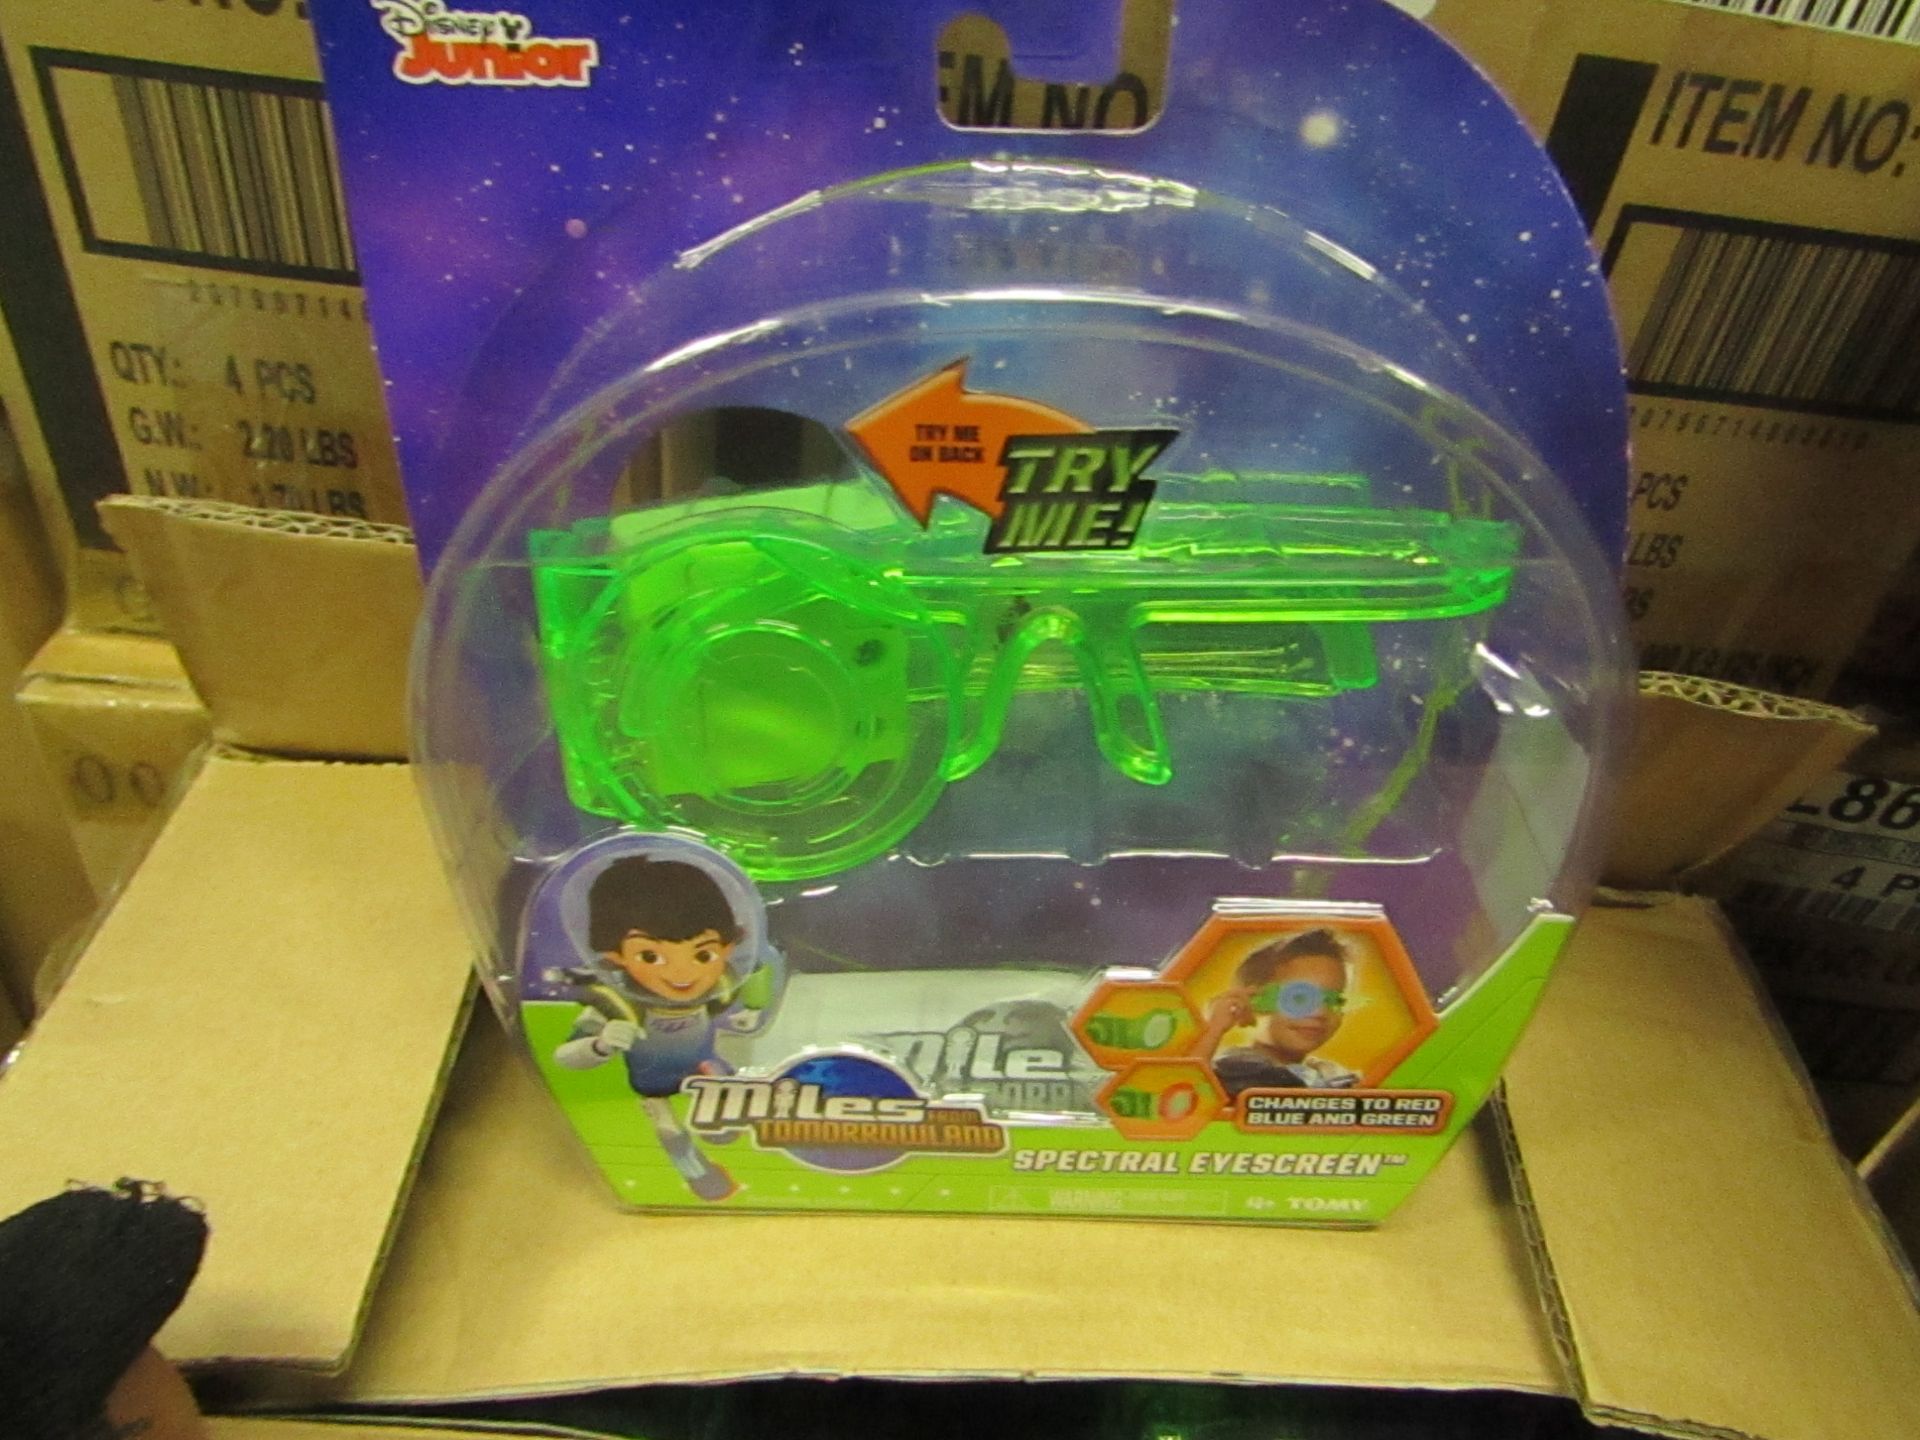 4 x Miles From Tomorrowland Spectral Eyescreen goggle. New & packaged